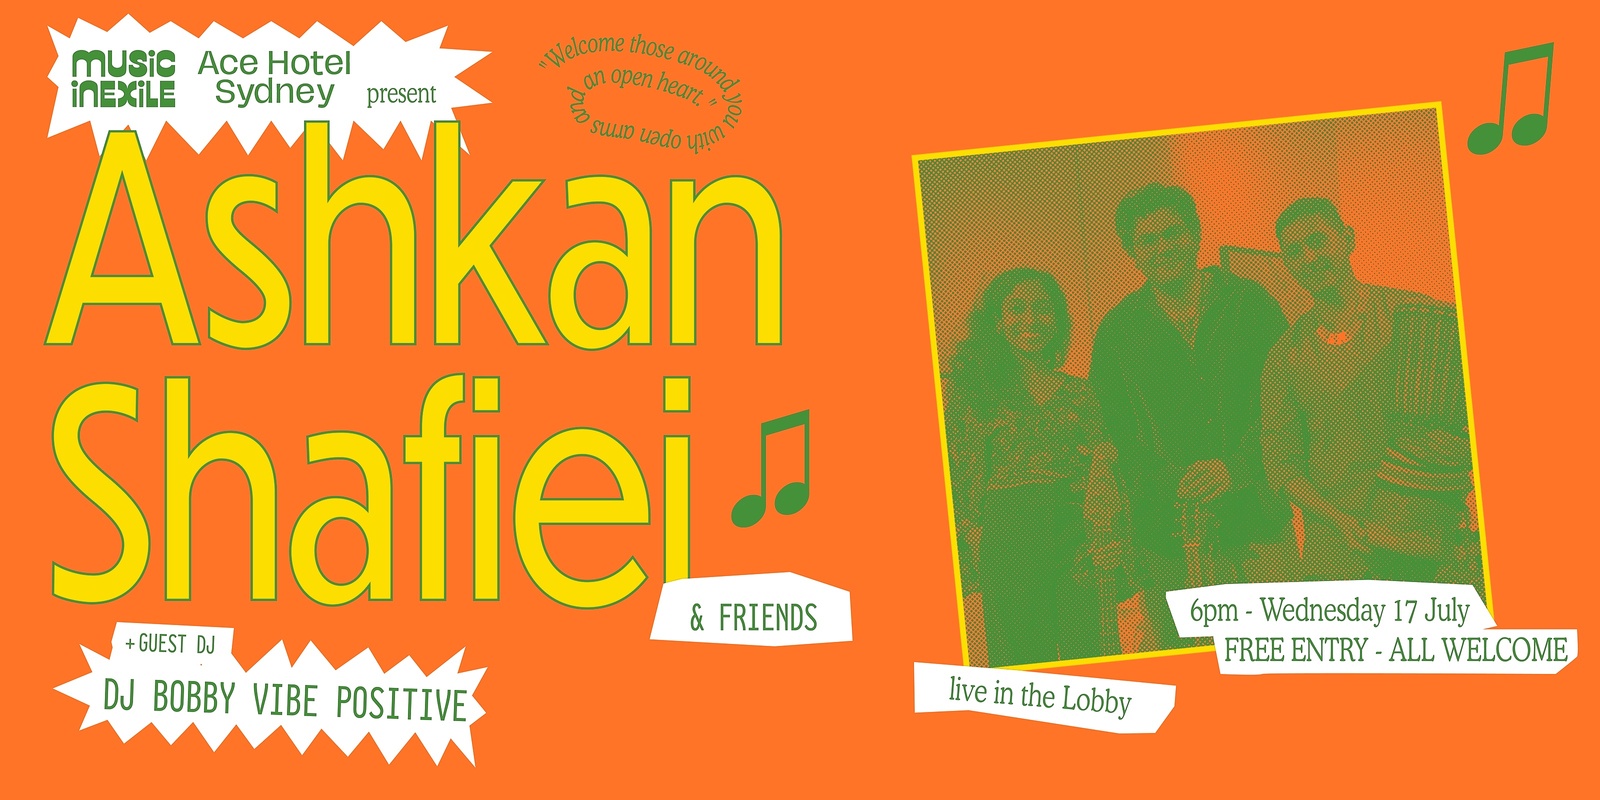 Banner image for Ashkan Shafiei & Friends *LIVE* at the Ace Hotel w/ Bobby Vibe Positive 